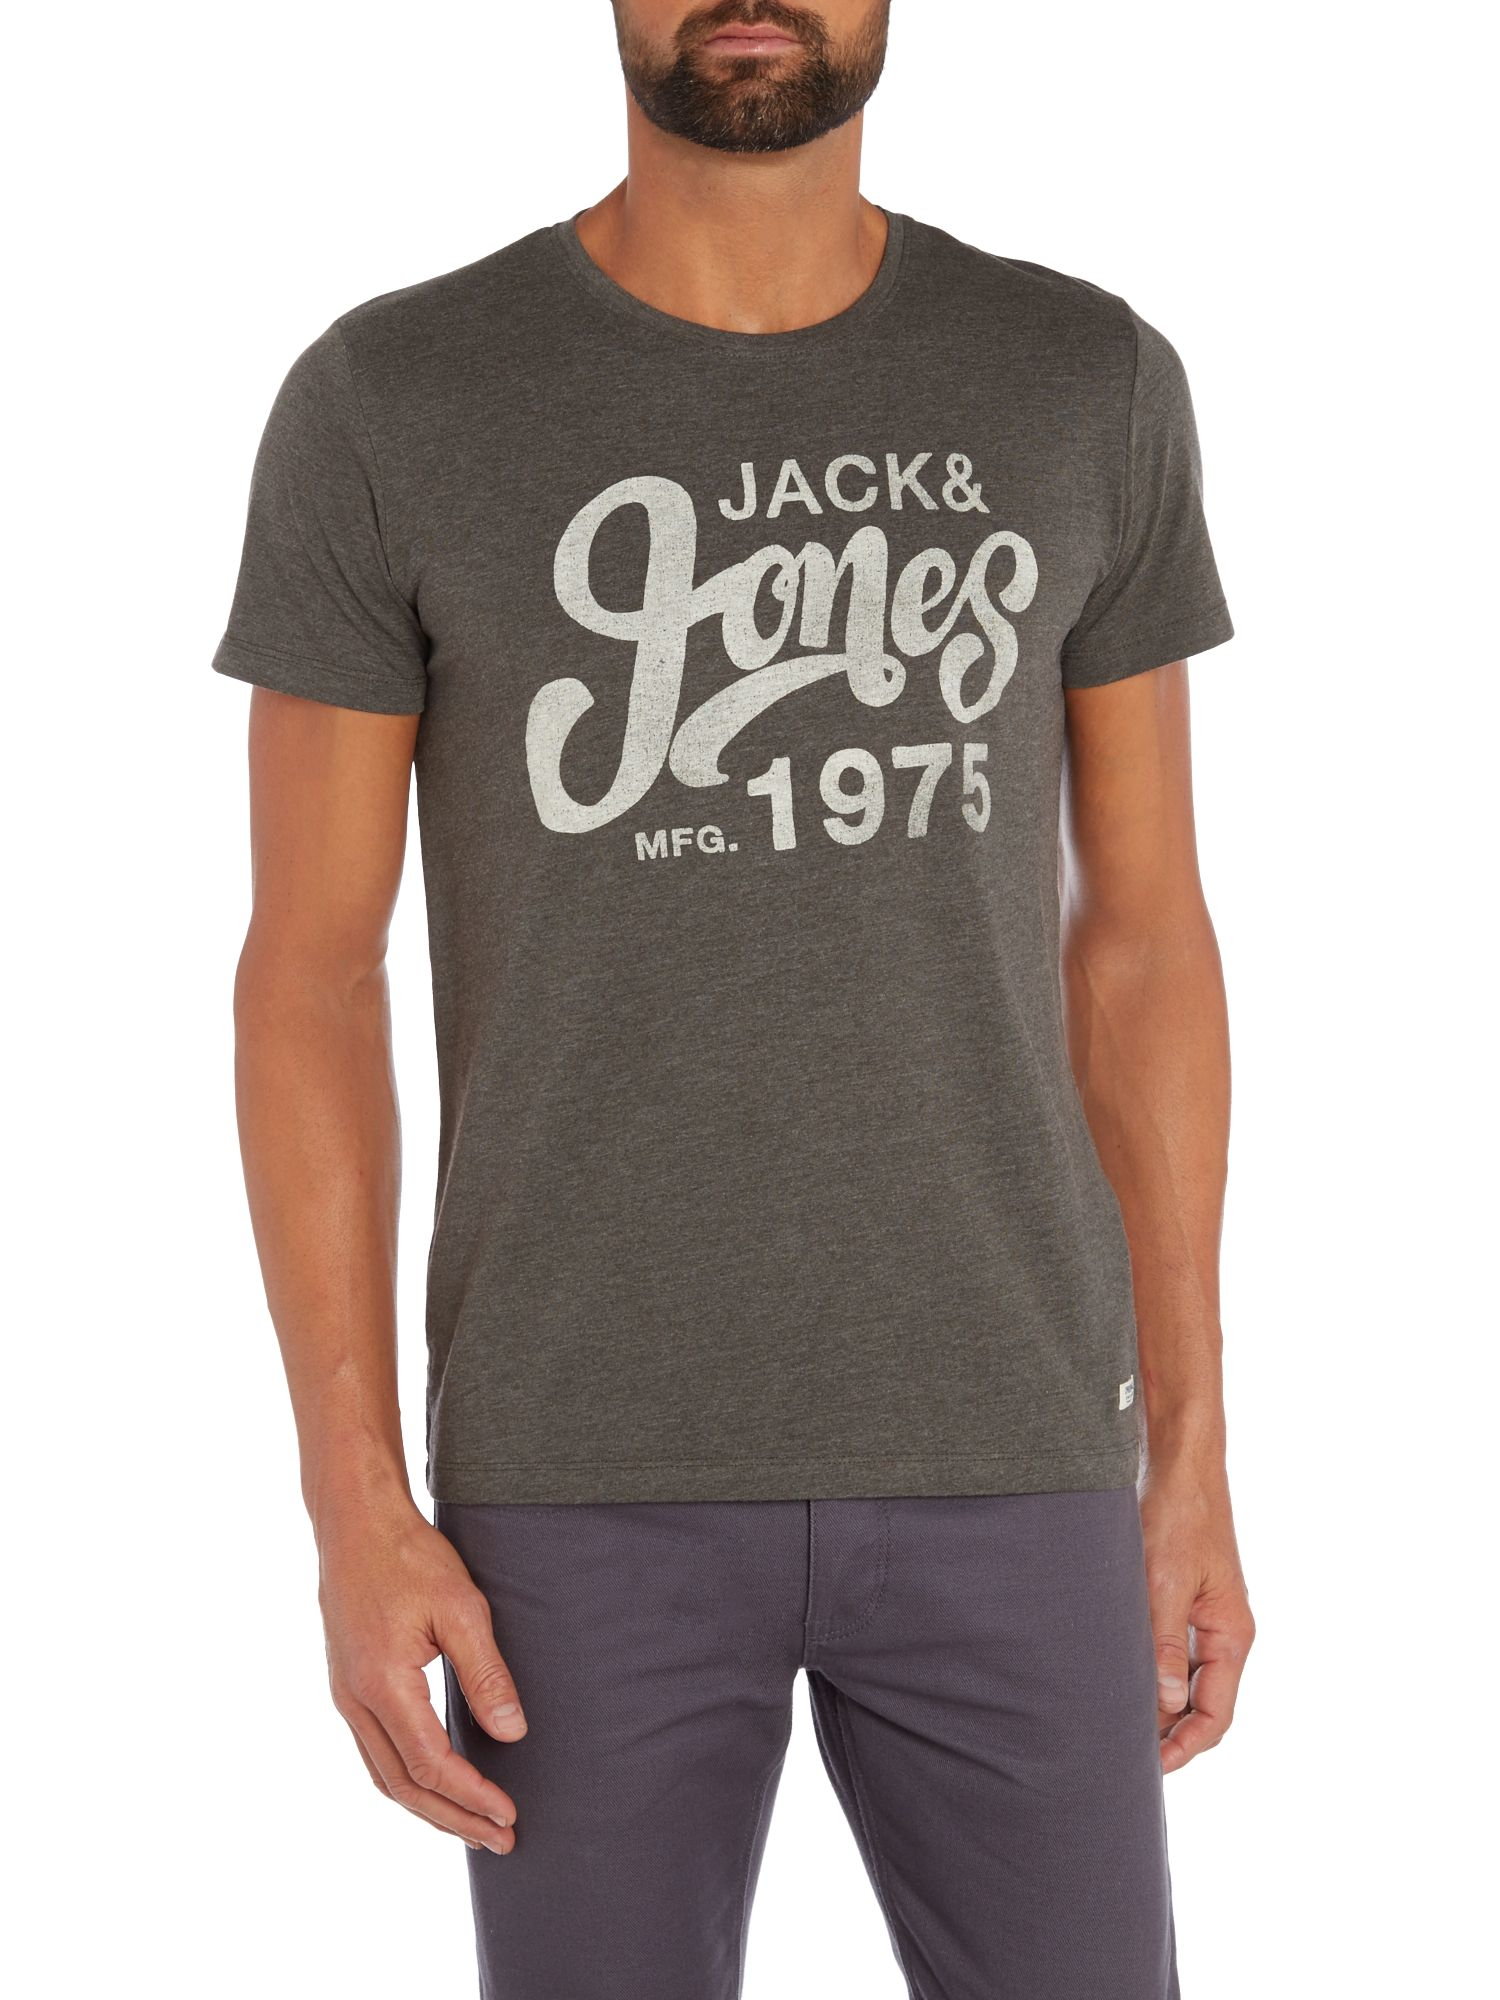 Jack and jones grey t shirt the middle ages